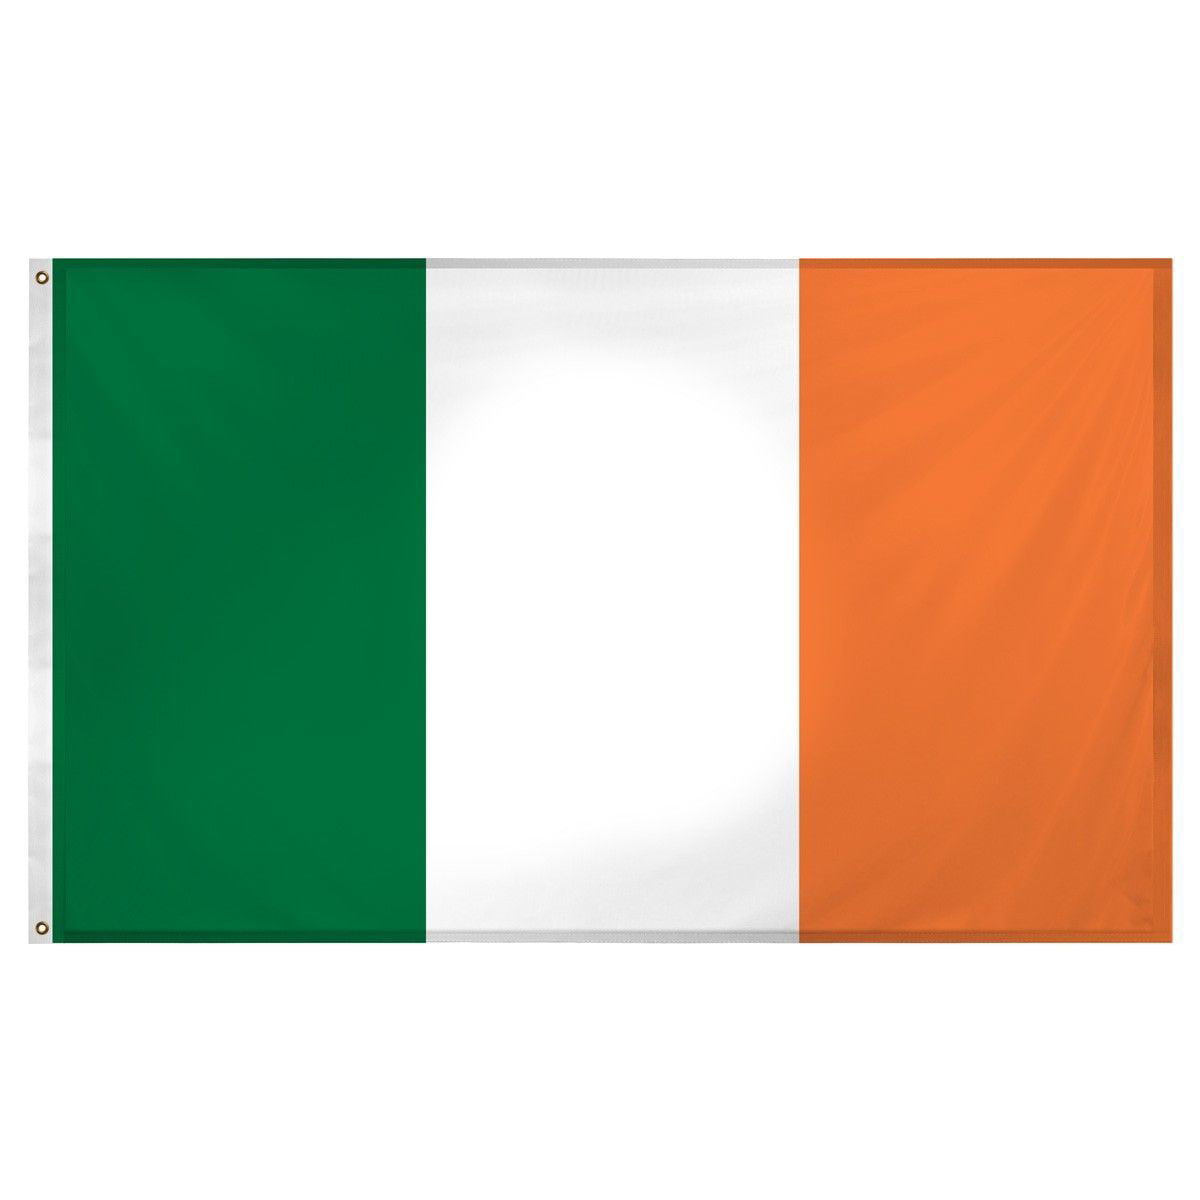 LOT OF 2 IRISH FLAG LARGE 3 X 5 FEET IRELAND EIRE INDOOR OUTDOOR WITH GROMMETS 